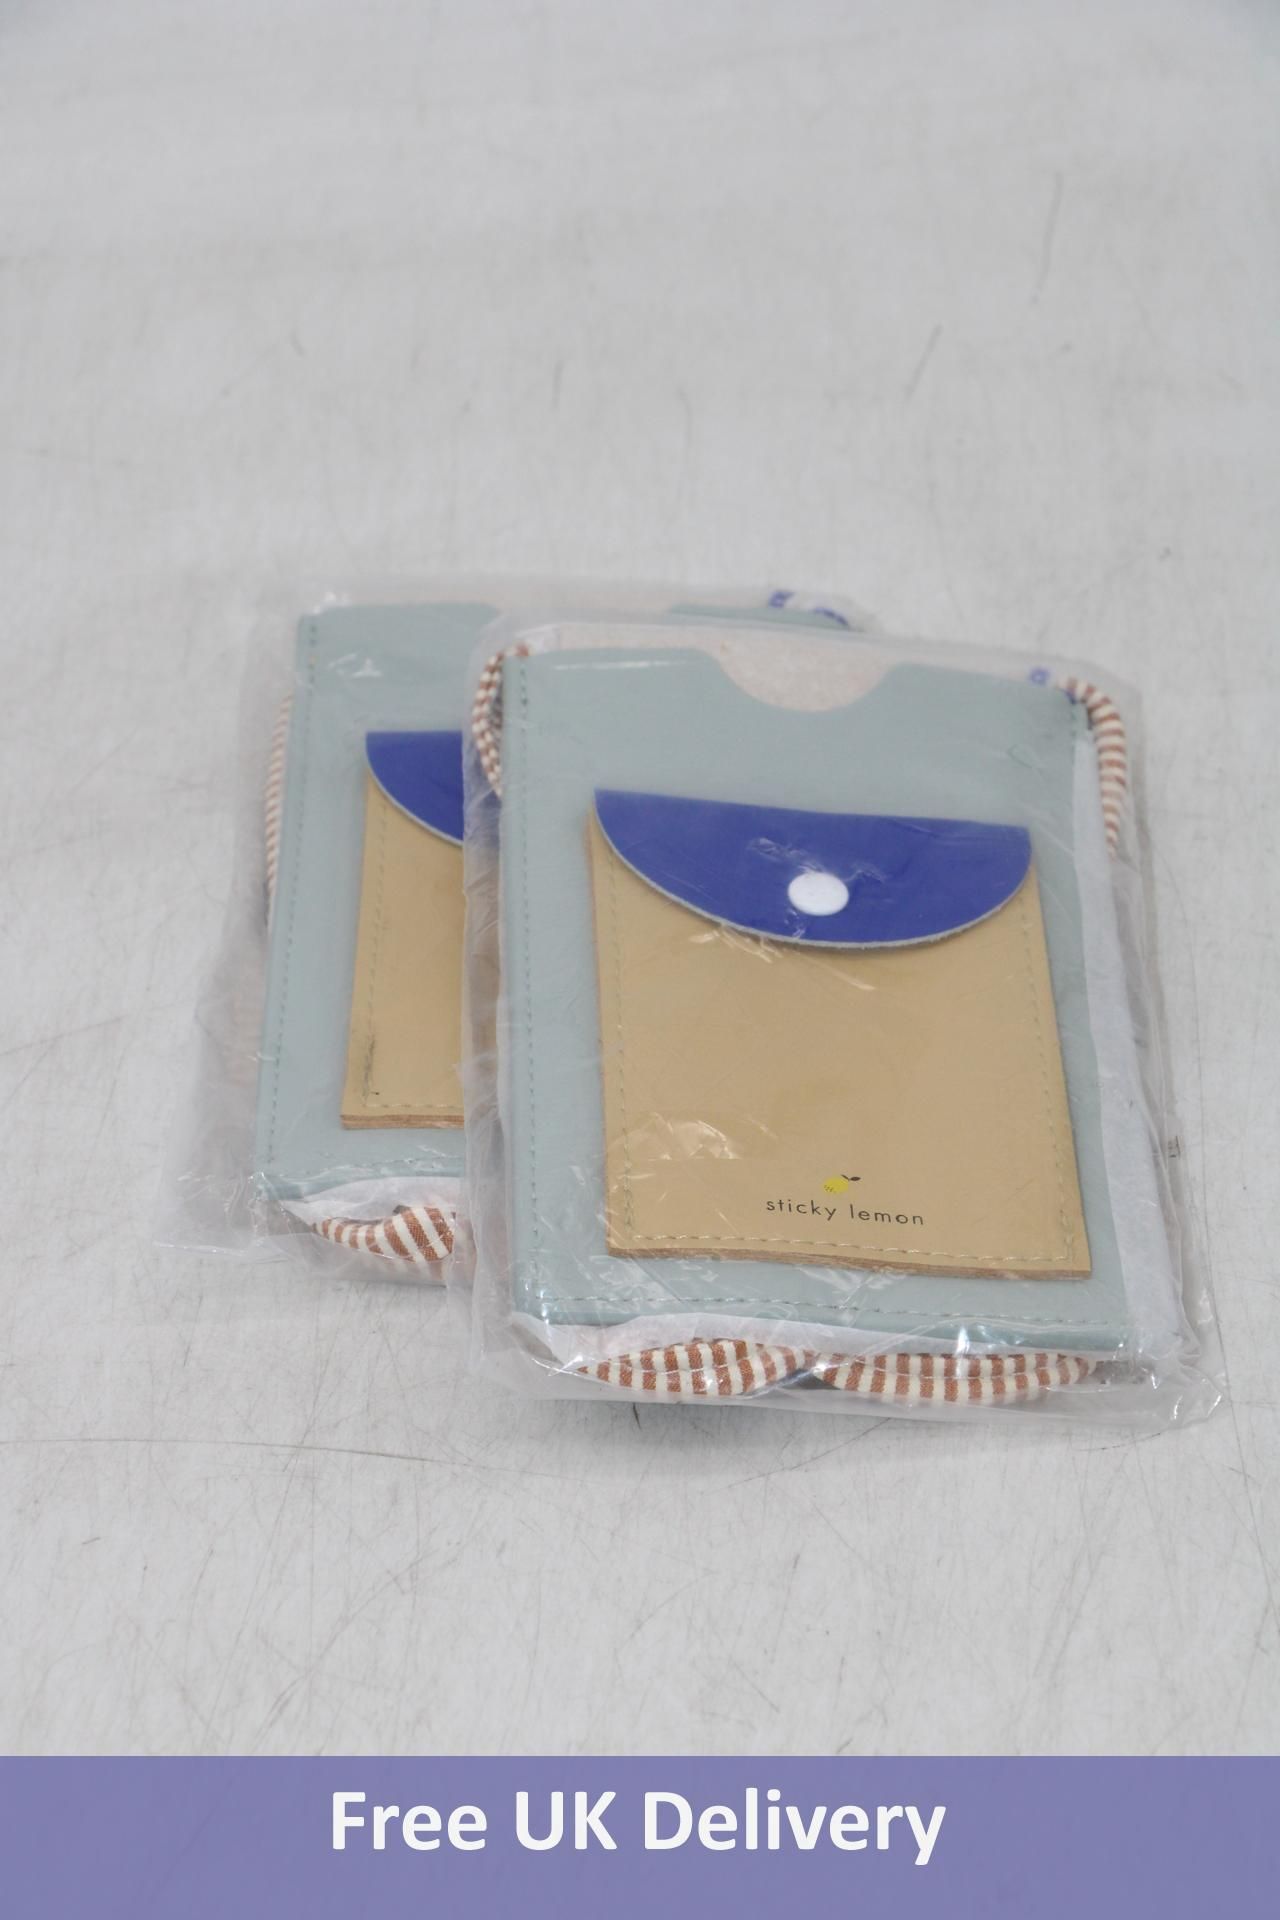 Two Sticky Lemon Moblie Phone Pouches, Meadows Blue Bird